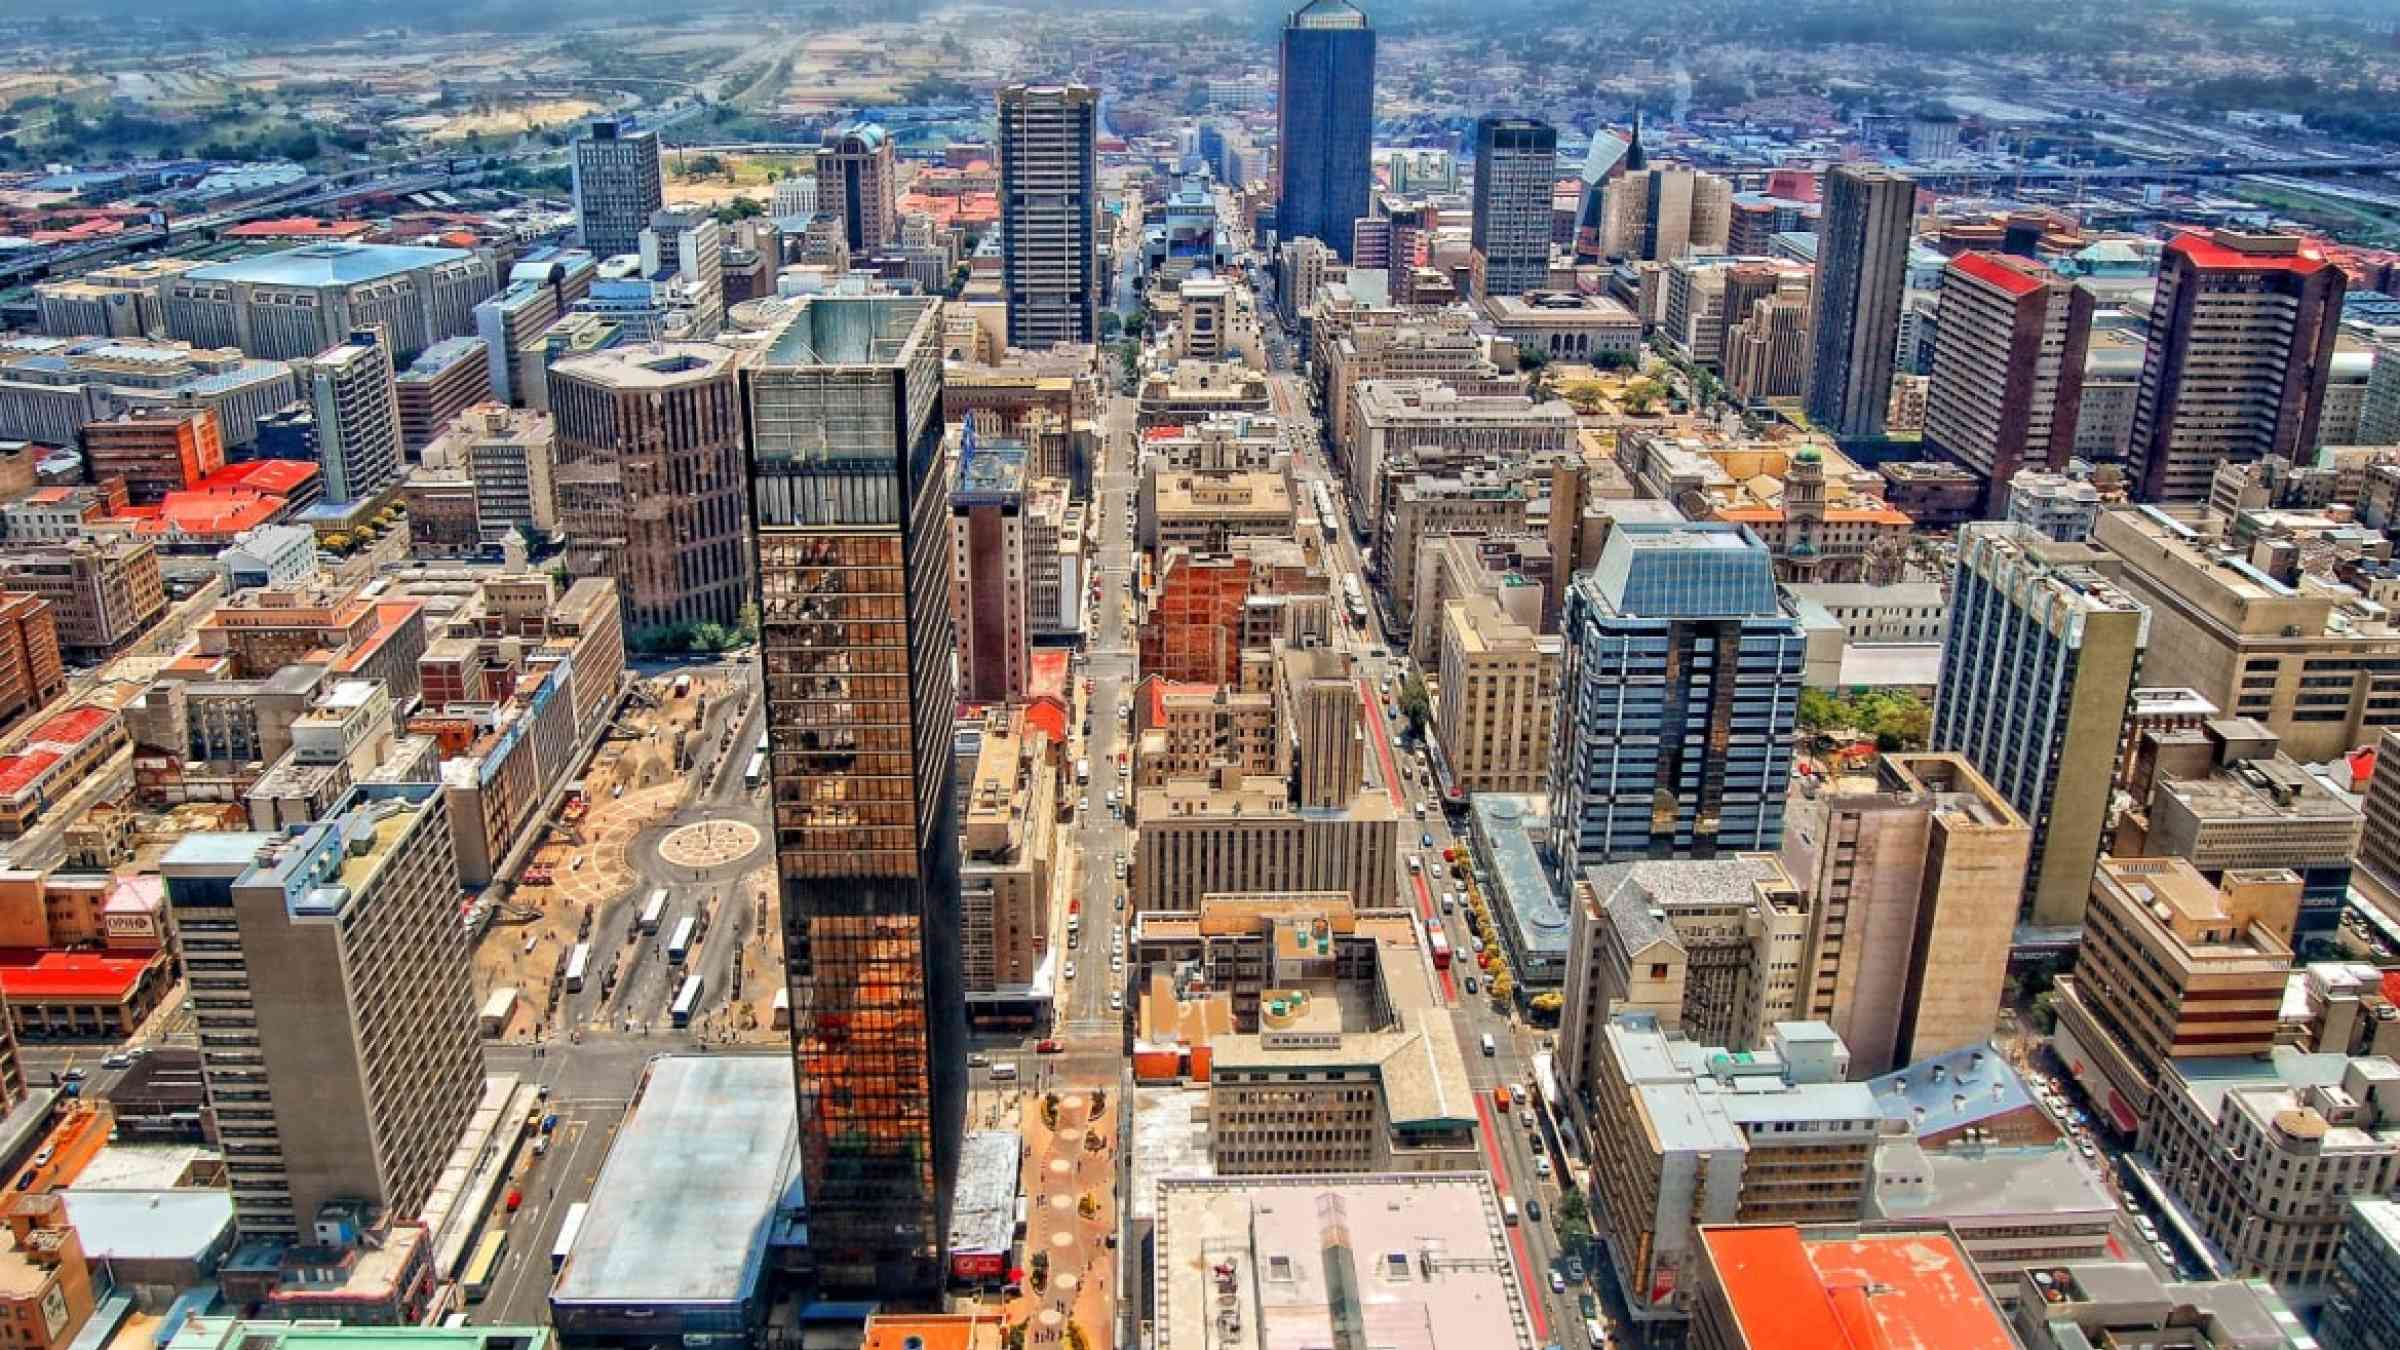 Areal view on Johannesburg, South Africa.